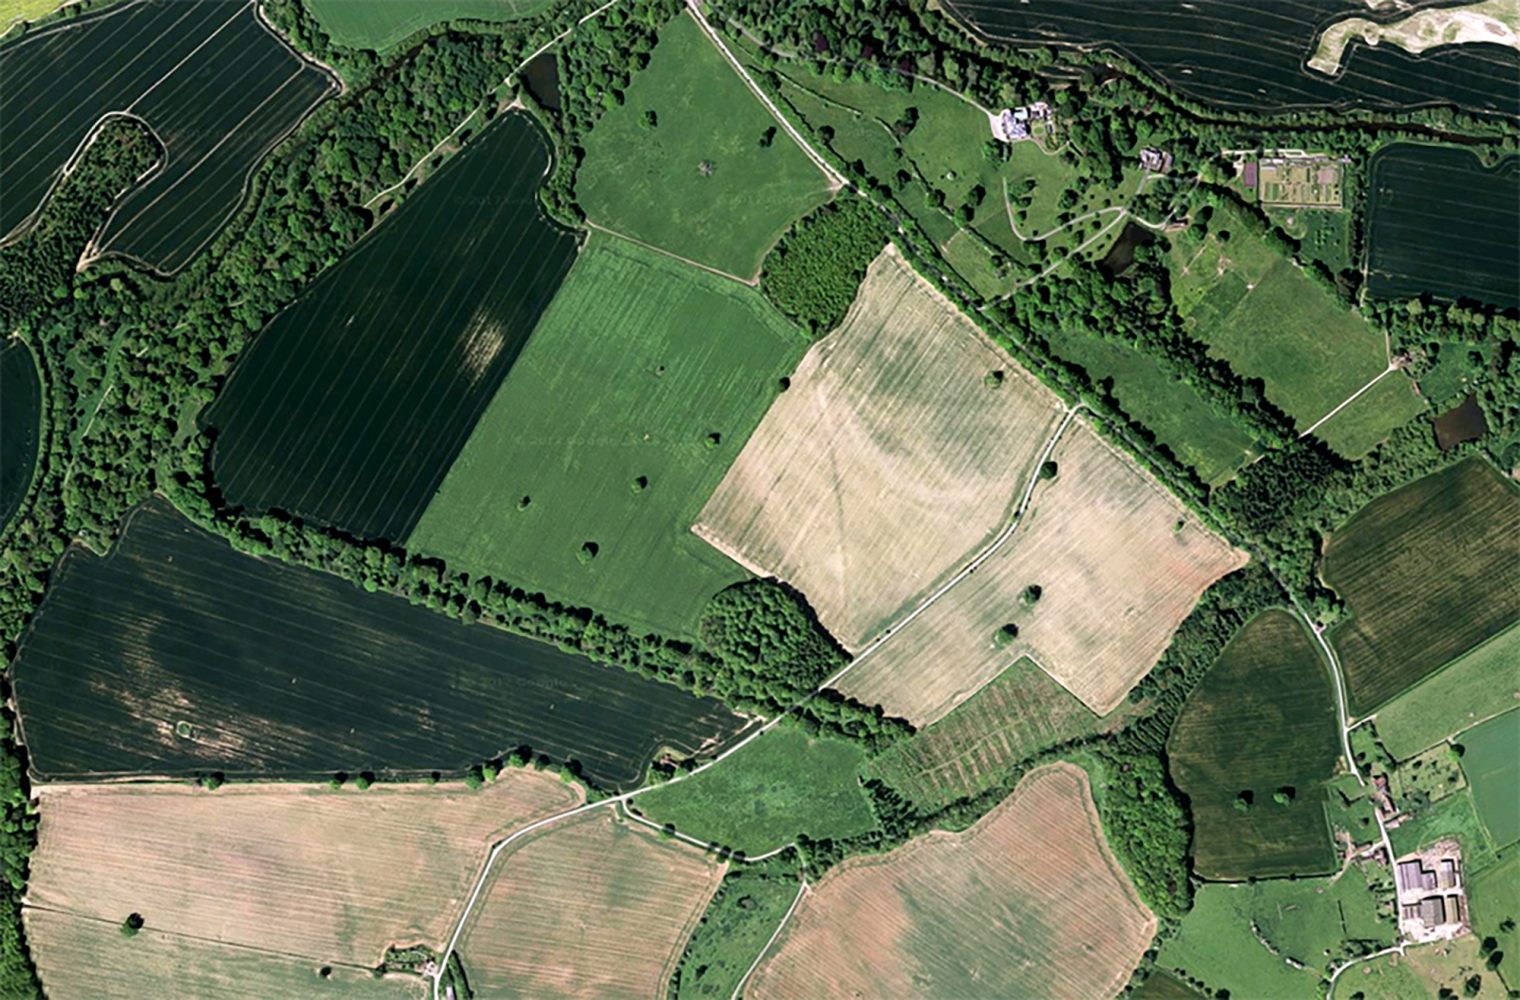 Satellite image of Ludlow Farm used for brand identity, packaging, retail and digital design by Household.